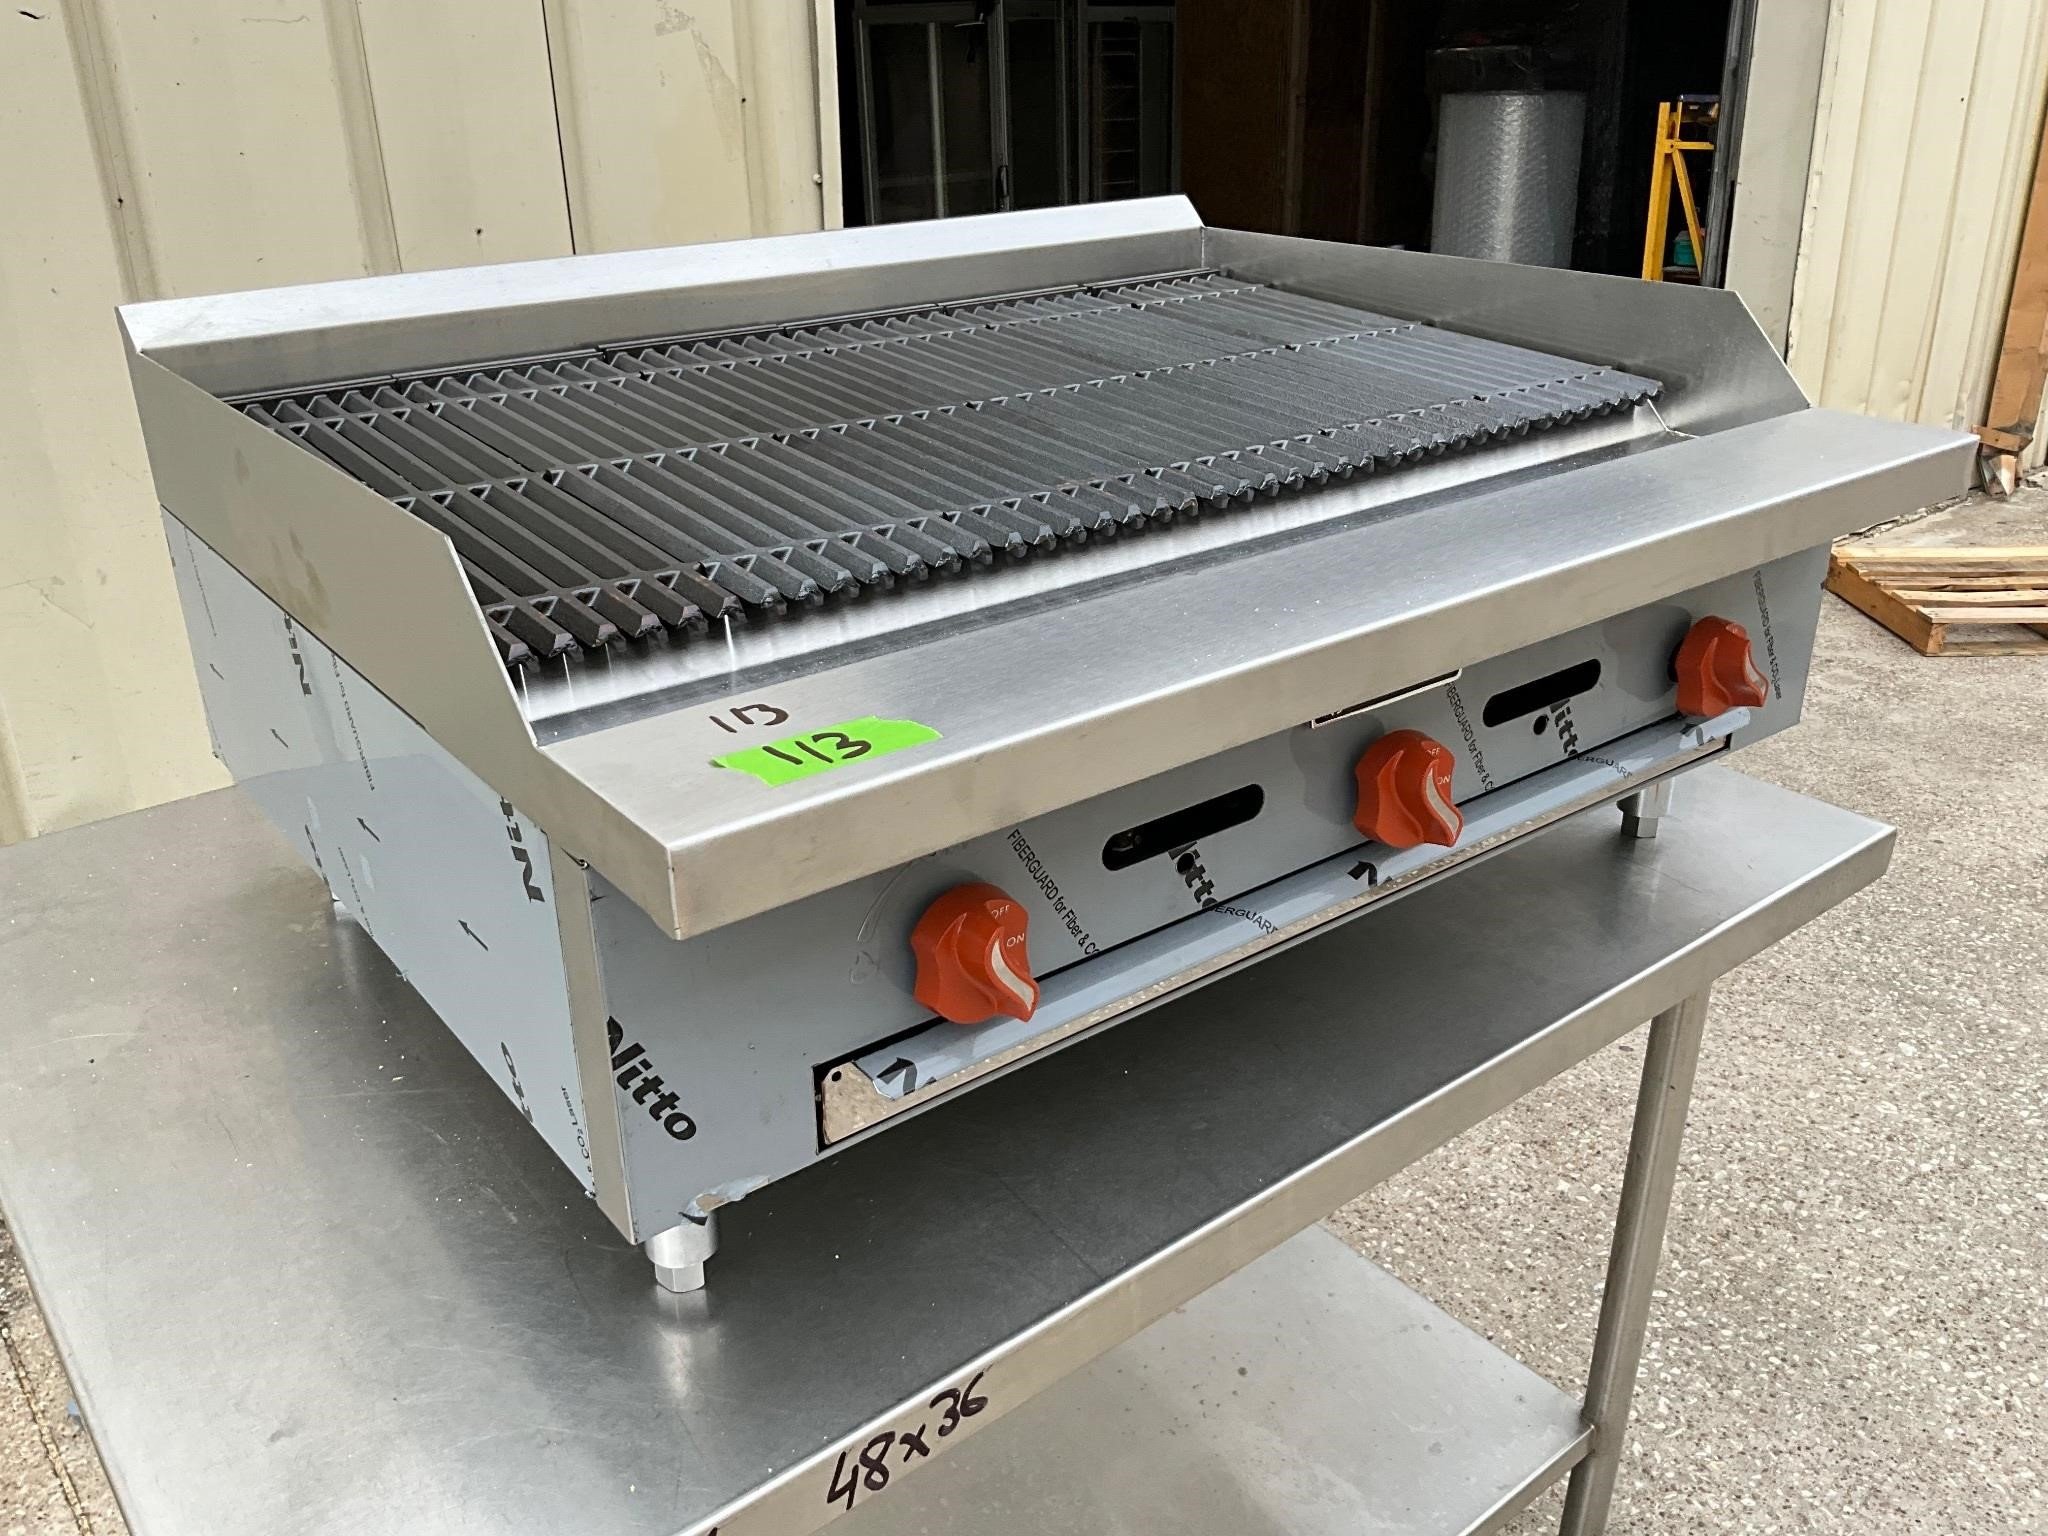 May 22nd Restaurant and Bakery Auction